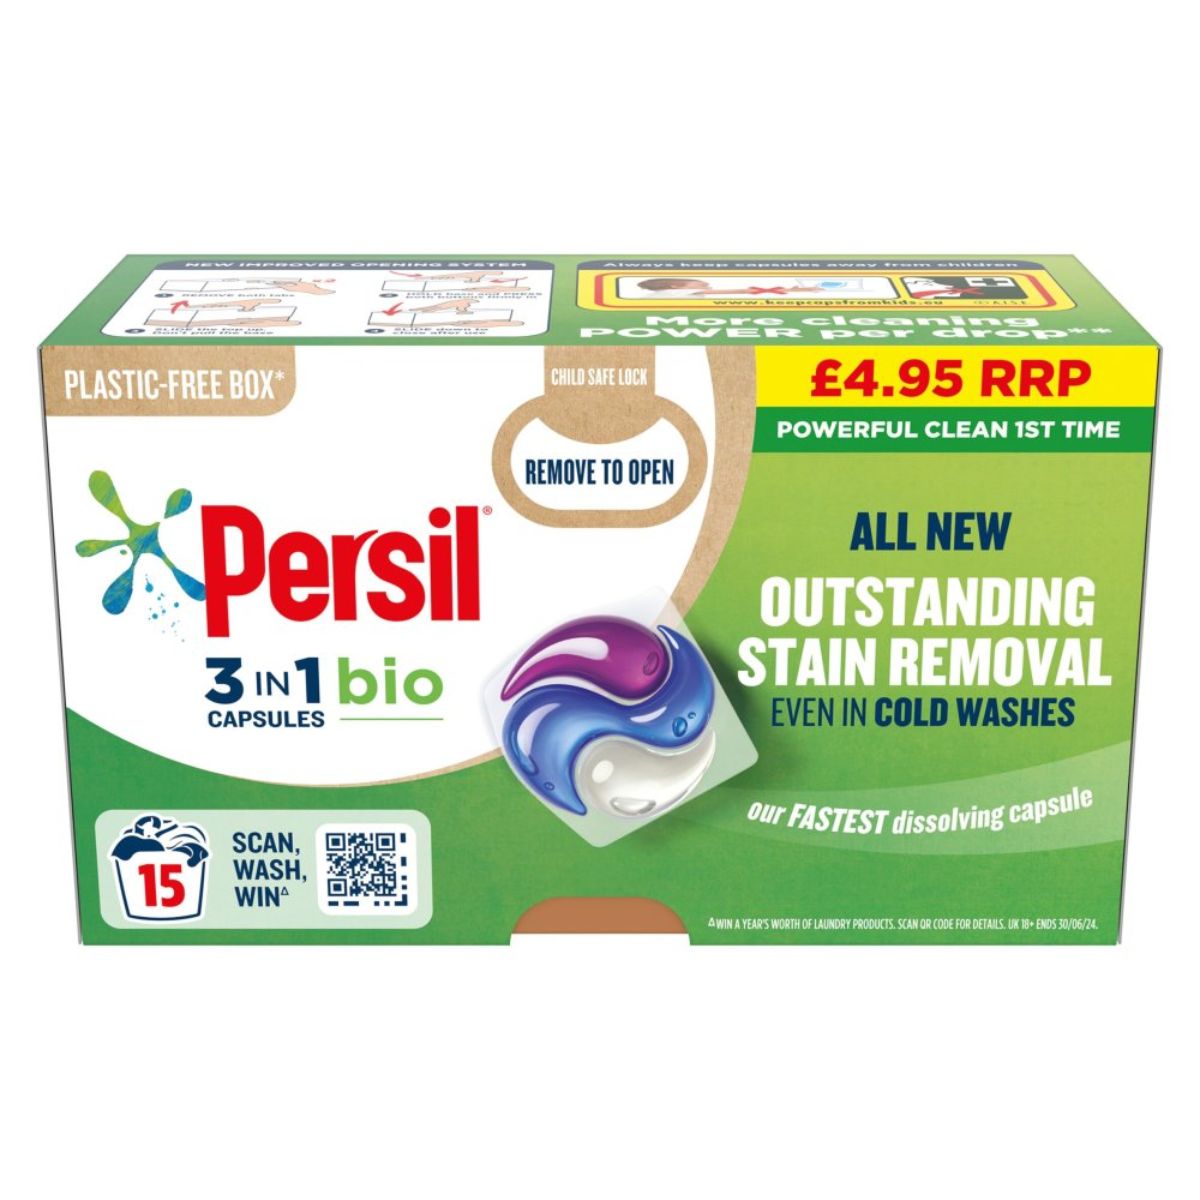 Persil - 3 in 1 Washing Capsules Bio - 15 Washes, the all-outstanding stain remover.